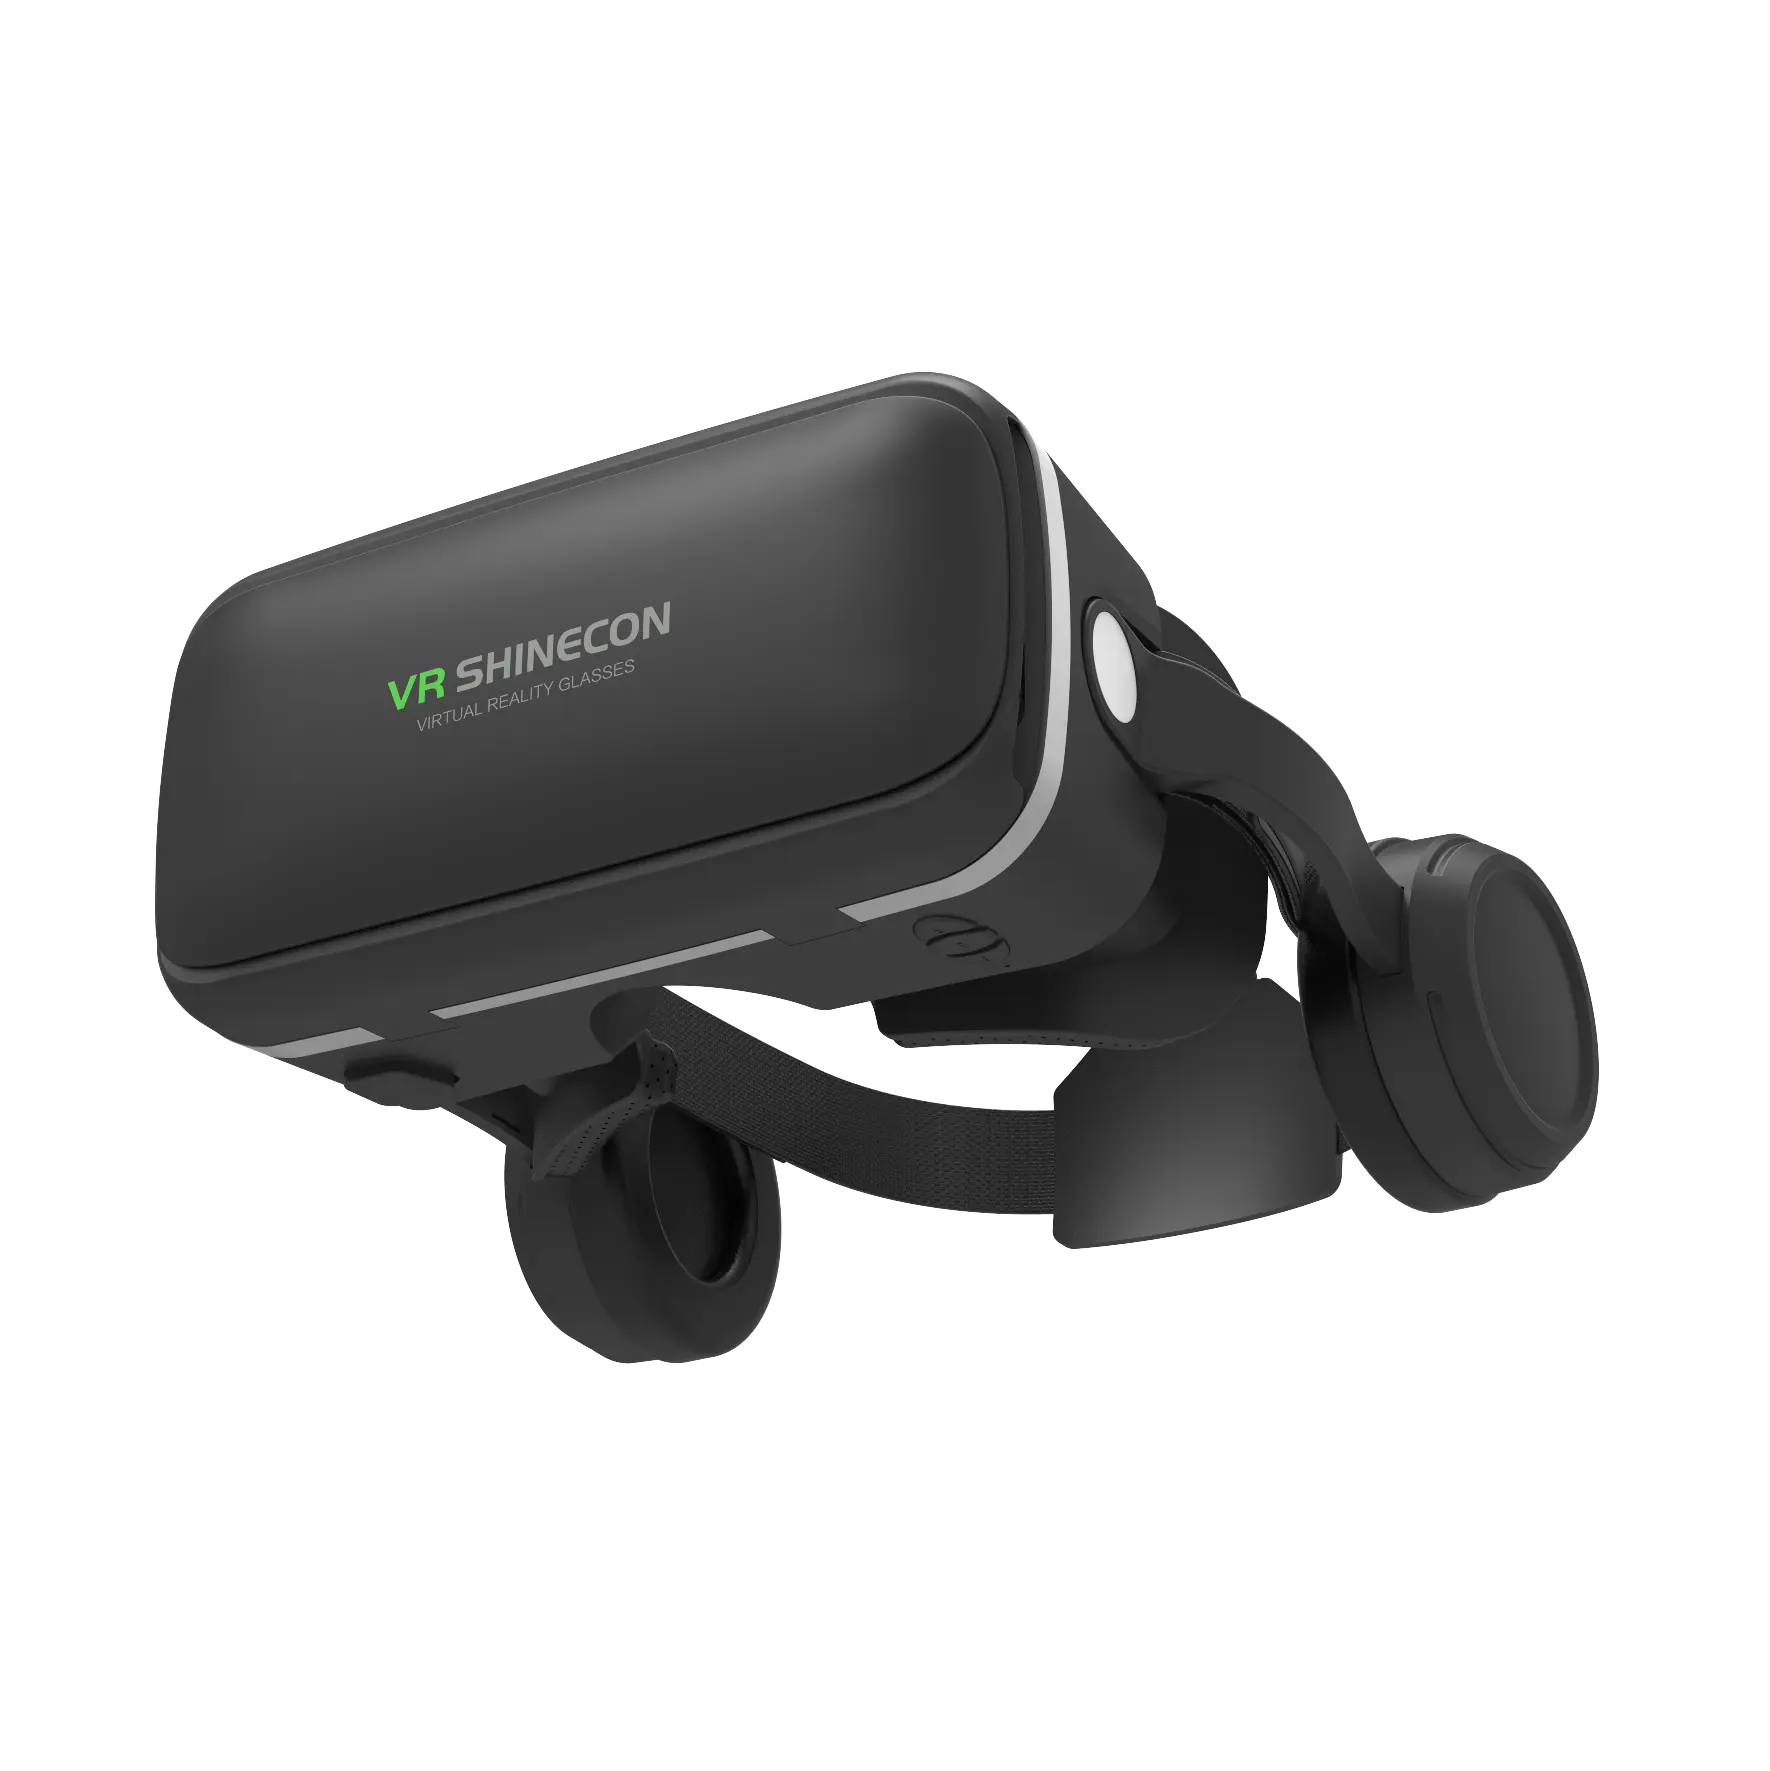 Aspherical lenses provide sharper picture HD 3d glasses virtual reality with headset high quality 3d vr glasses